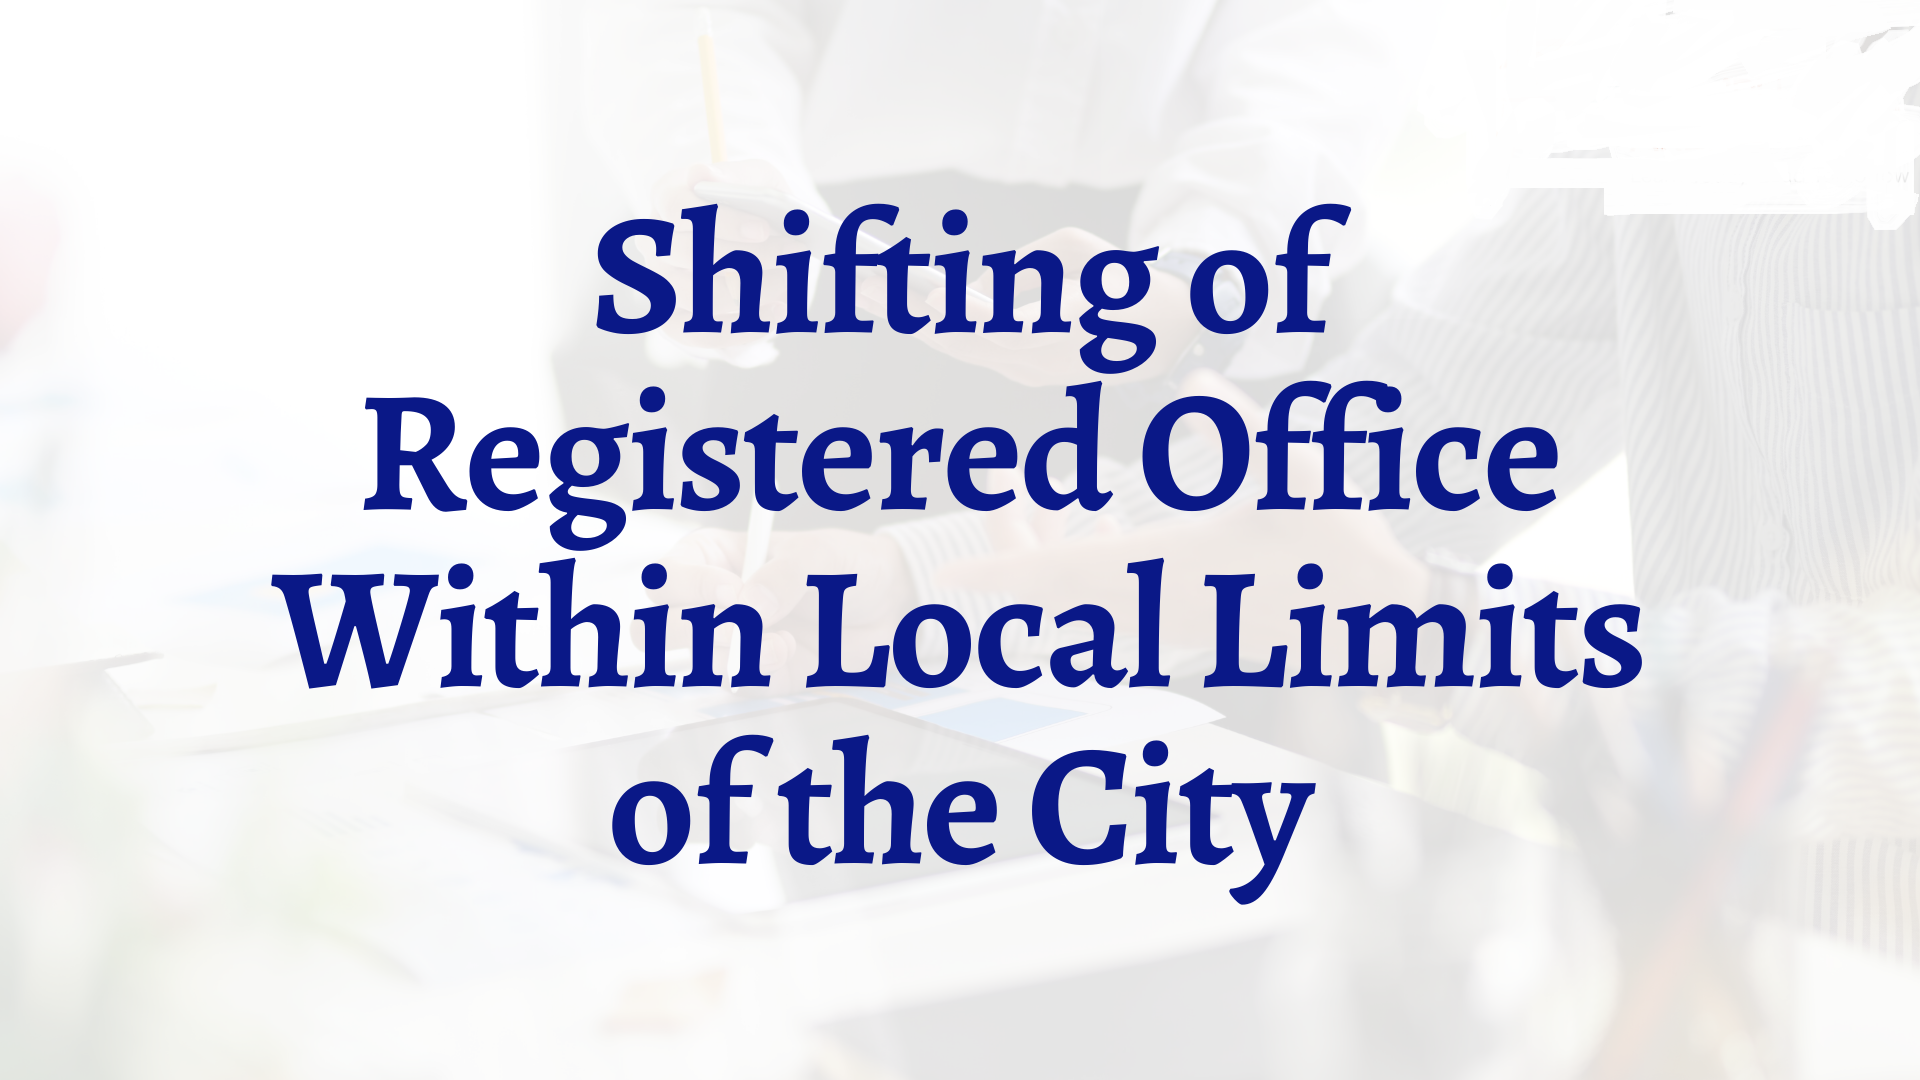 SHIFTING-OF-REGISTERED-OFFICE-WITHIN-THE-LOCAL-LIMITS-OF-THE-CITY-TOWN-VILLAGE-UNDER-THE-COMPANIES-ACT-2013